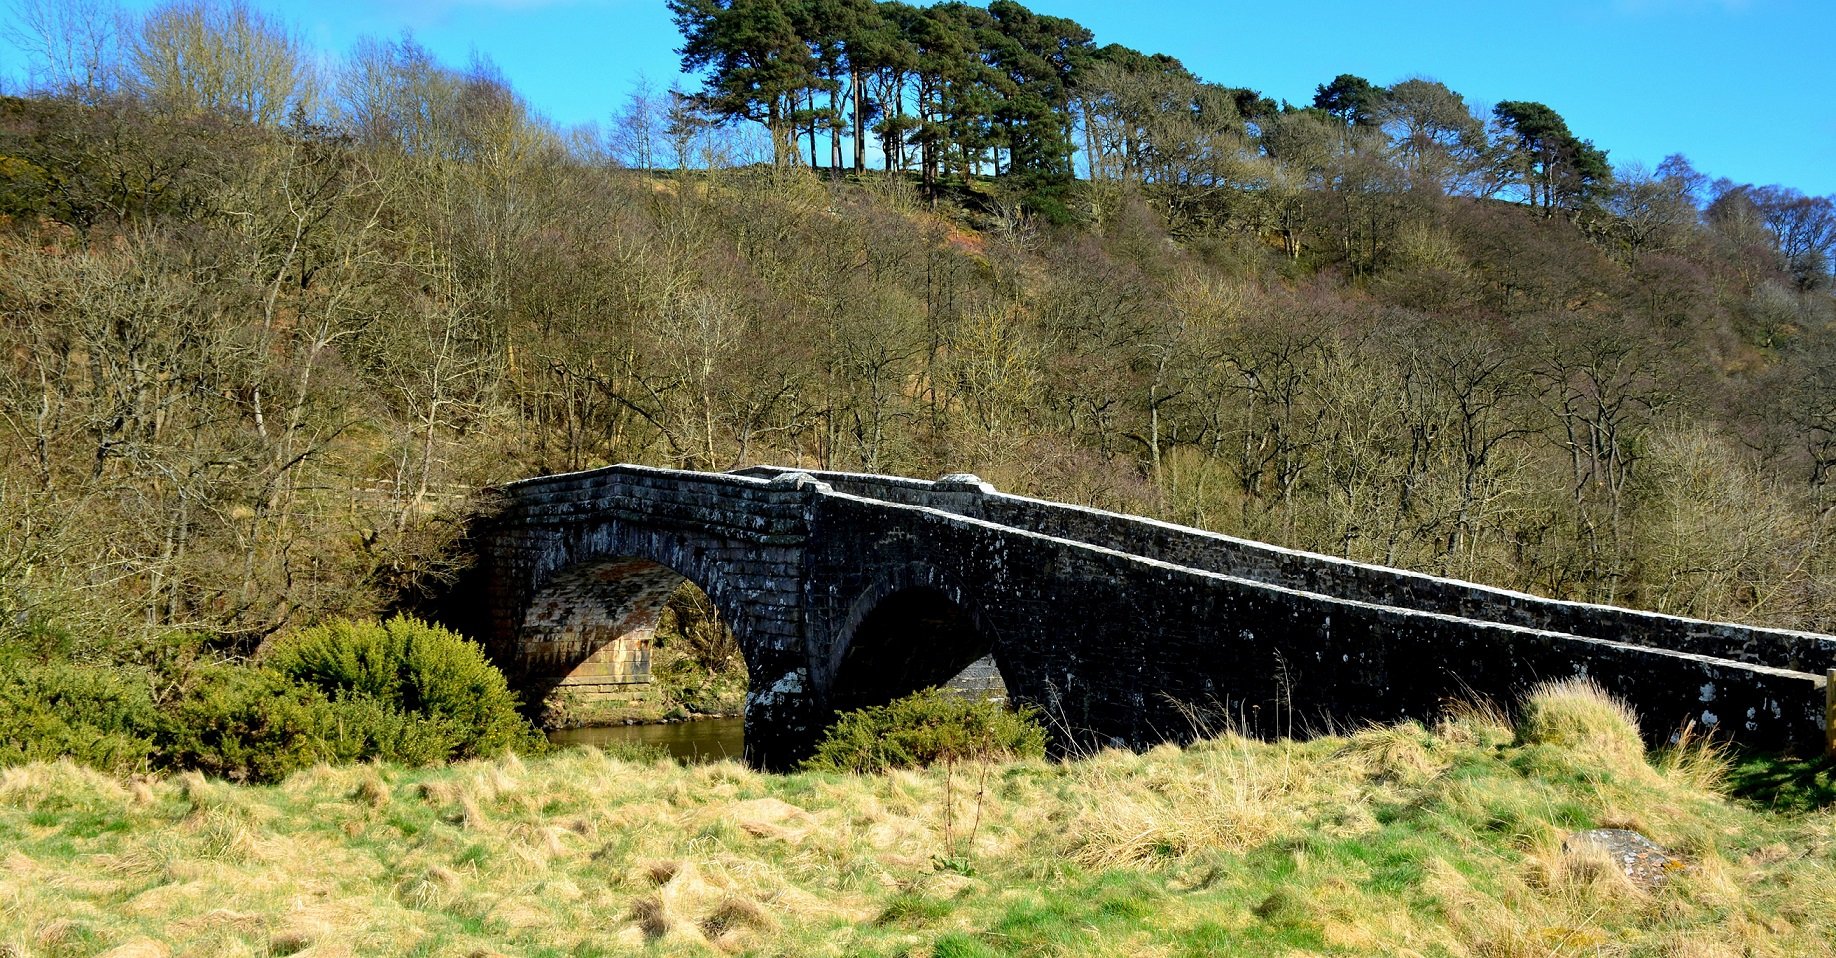 Stone bridge viewed across a grassy river bank (in the foreground), towards wooded slope on the far bank.